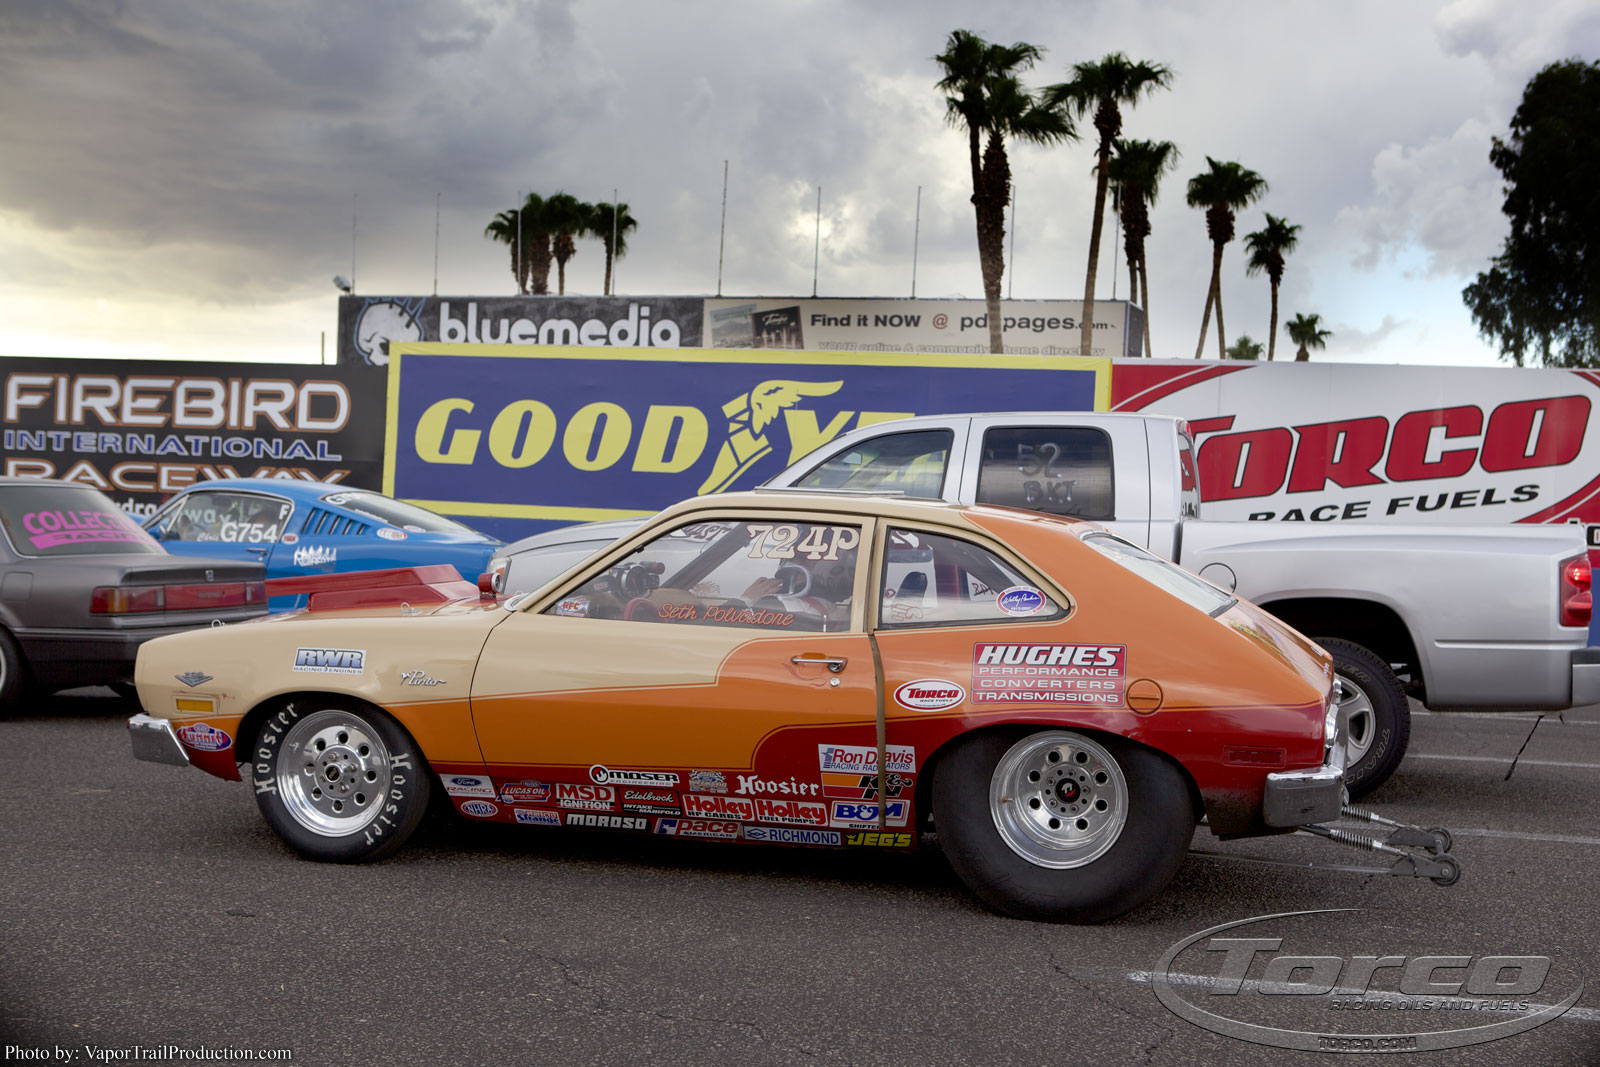 drag, Racing, Hot, Rod, Rods, Race, Ford, Pinto Wallpaper